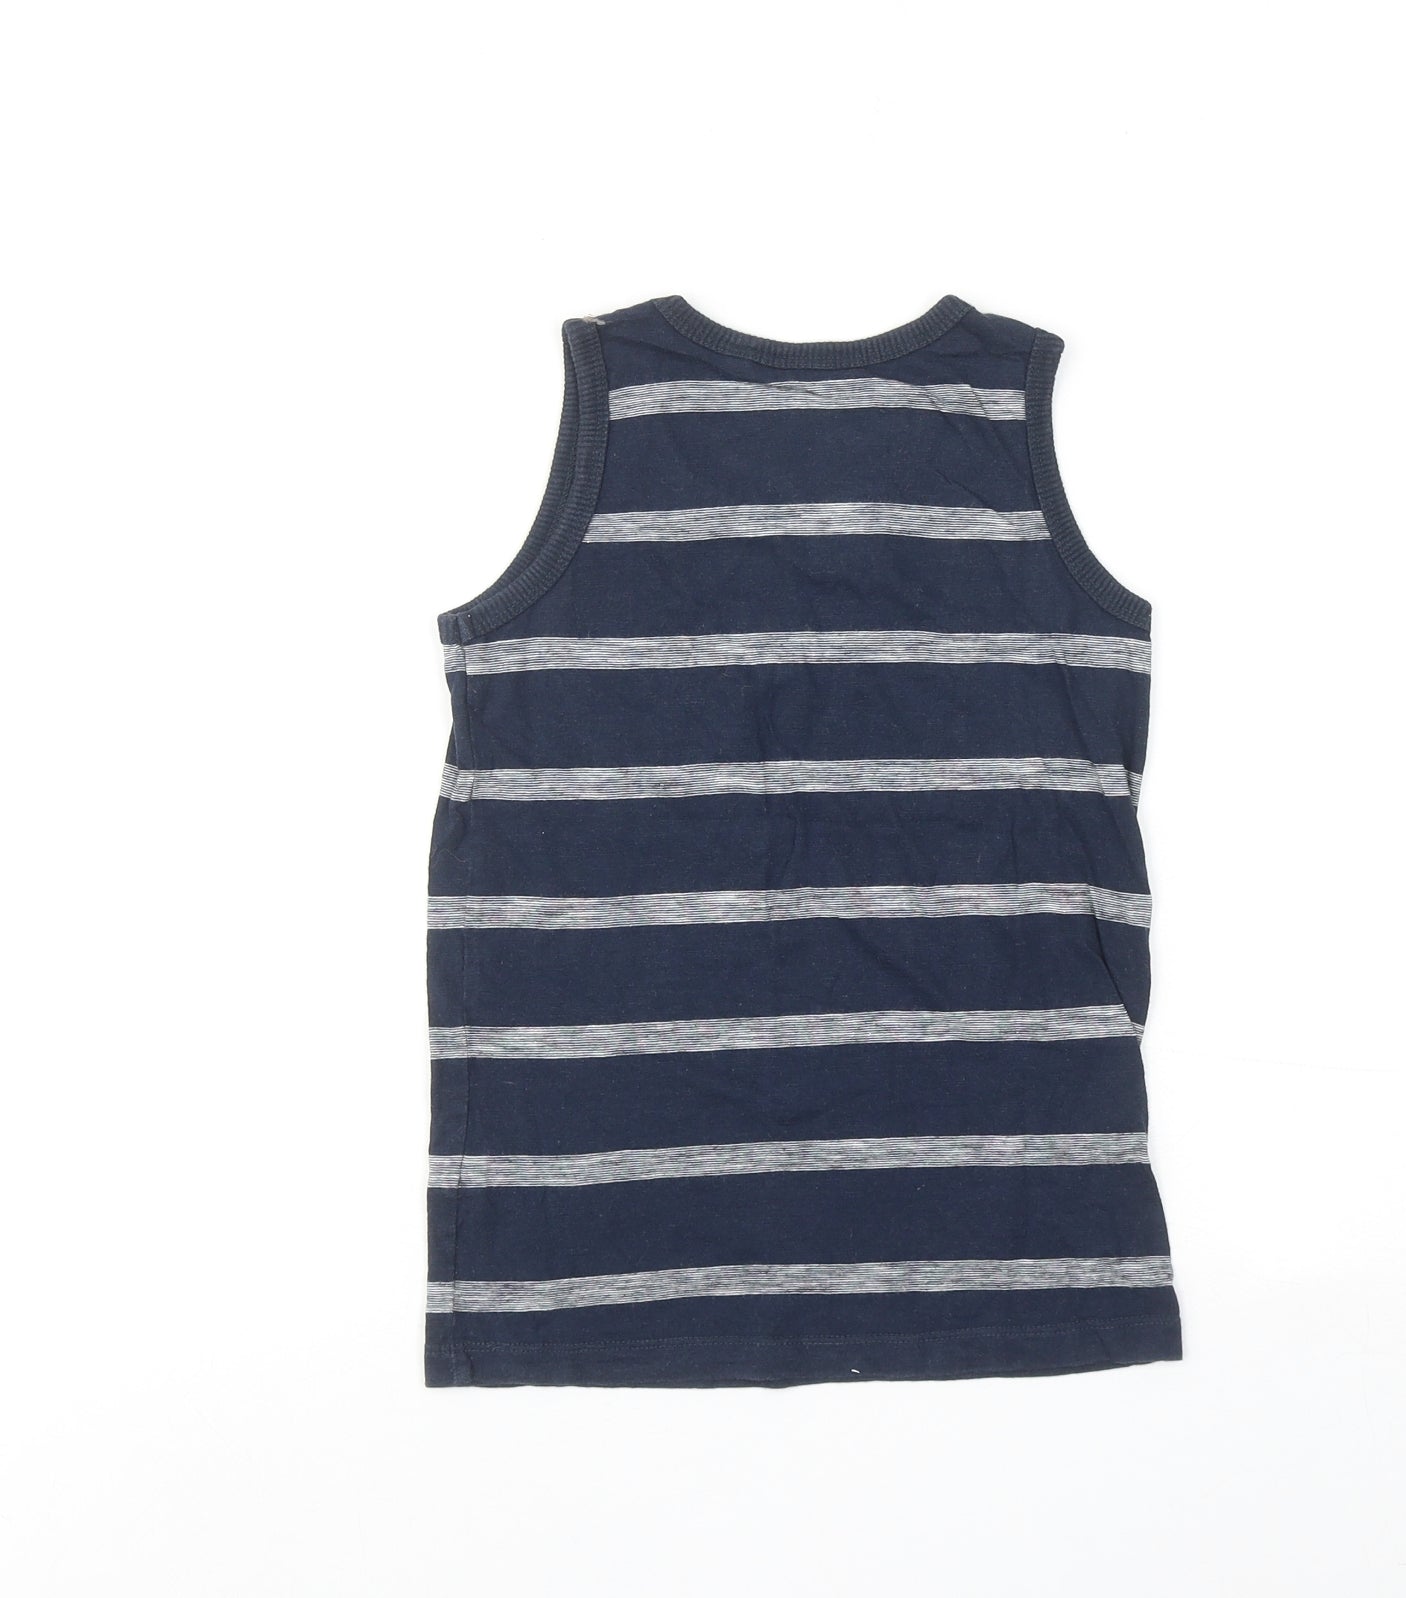 NEXT Boys Blue Striped Cotton Basic Tank Size 6 Years Round Neck Pullover